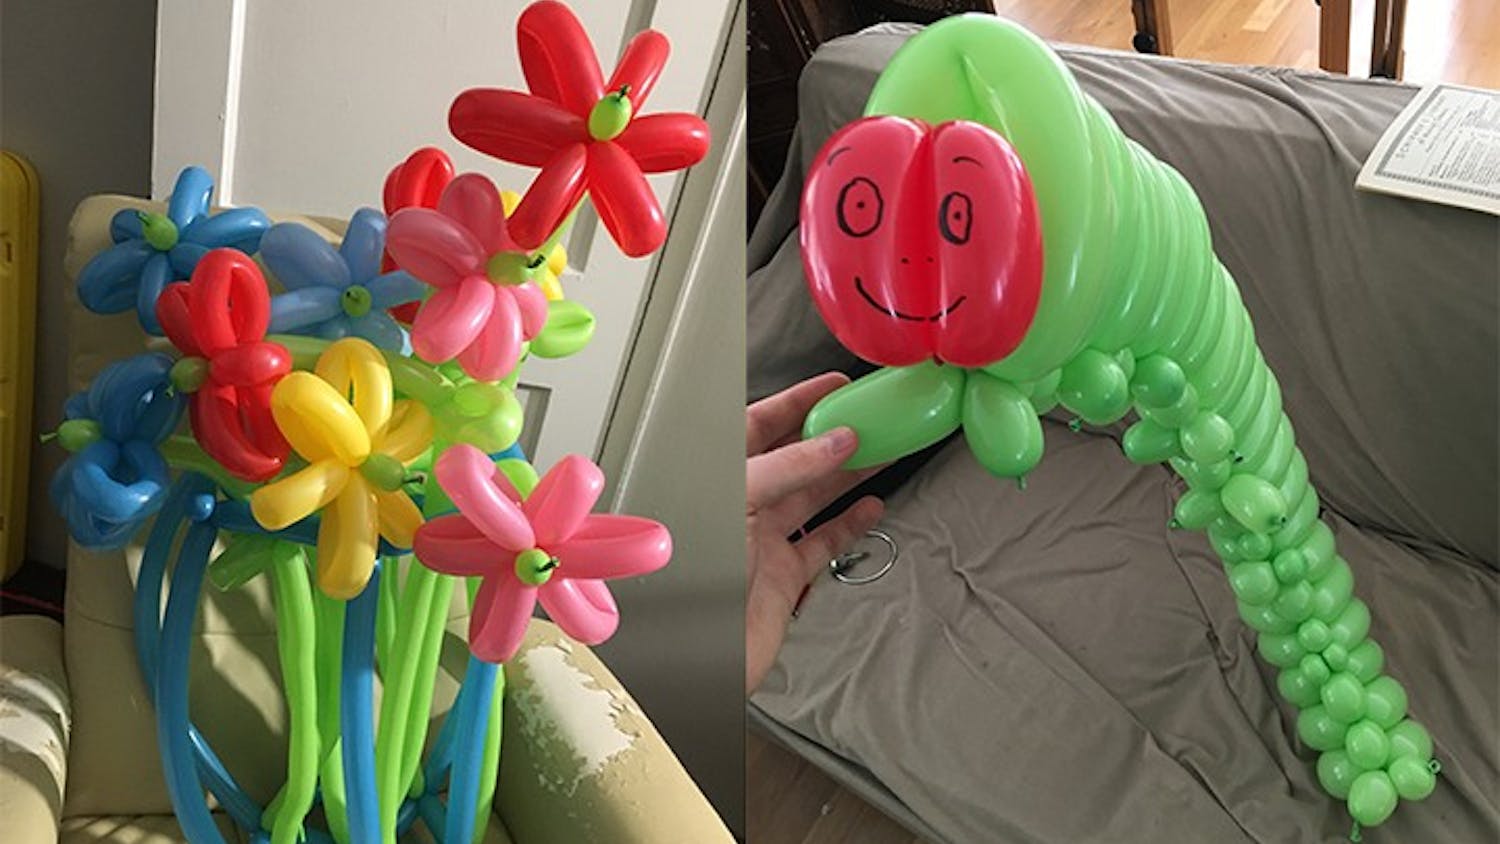 Some examples of Gabe Turner's balloon art include a bouquet of flowers (left) and a caterpillar inspired by the children's book "The Very Hungry Caterpillar" (right).